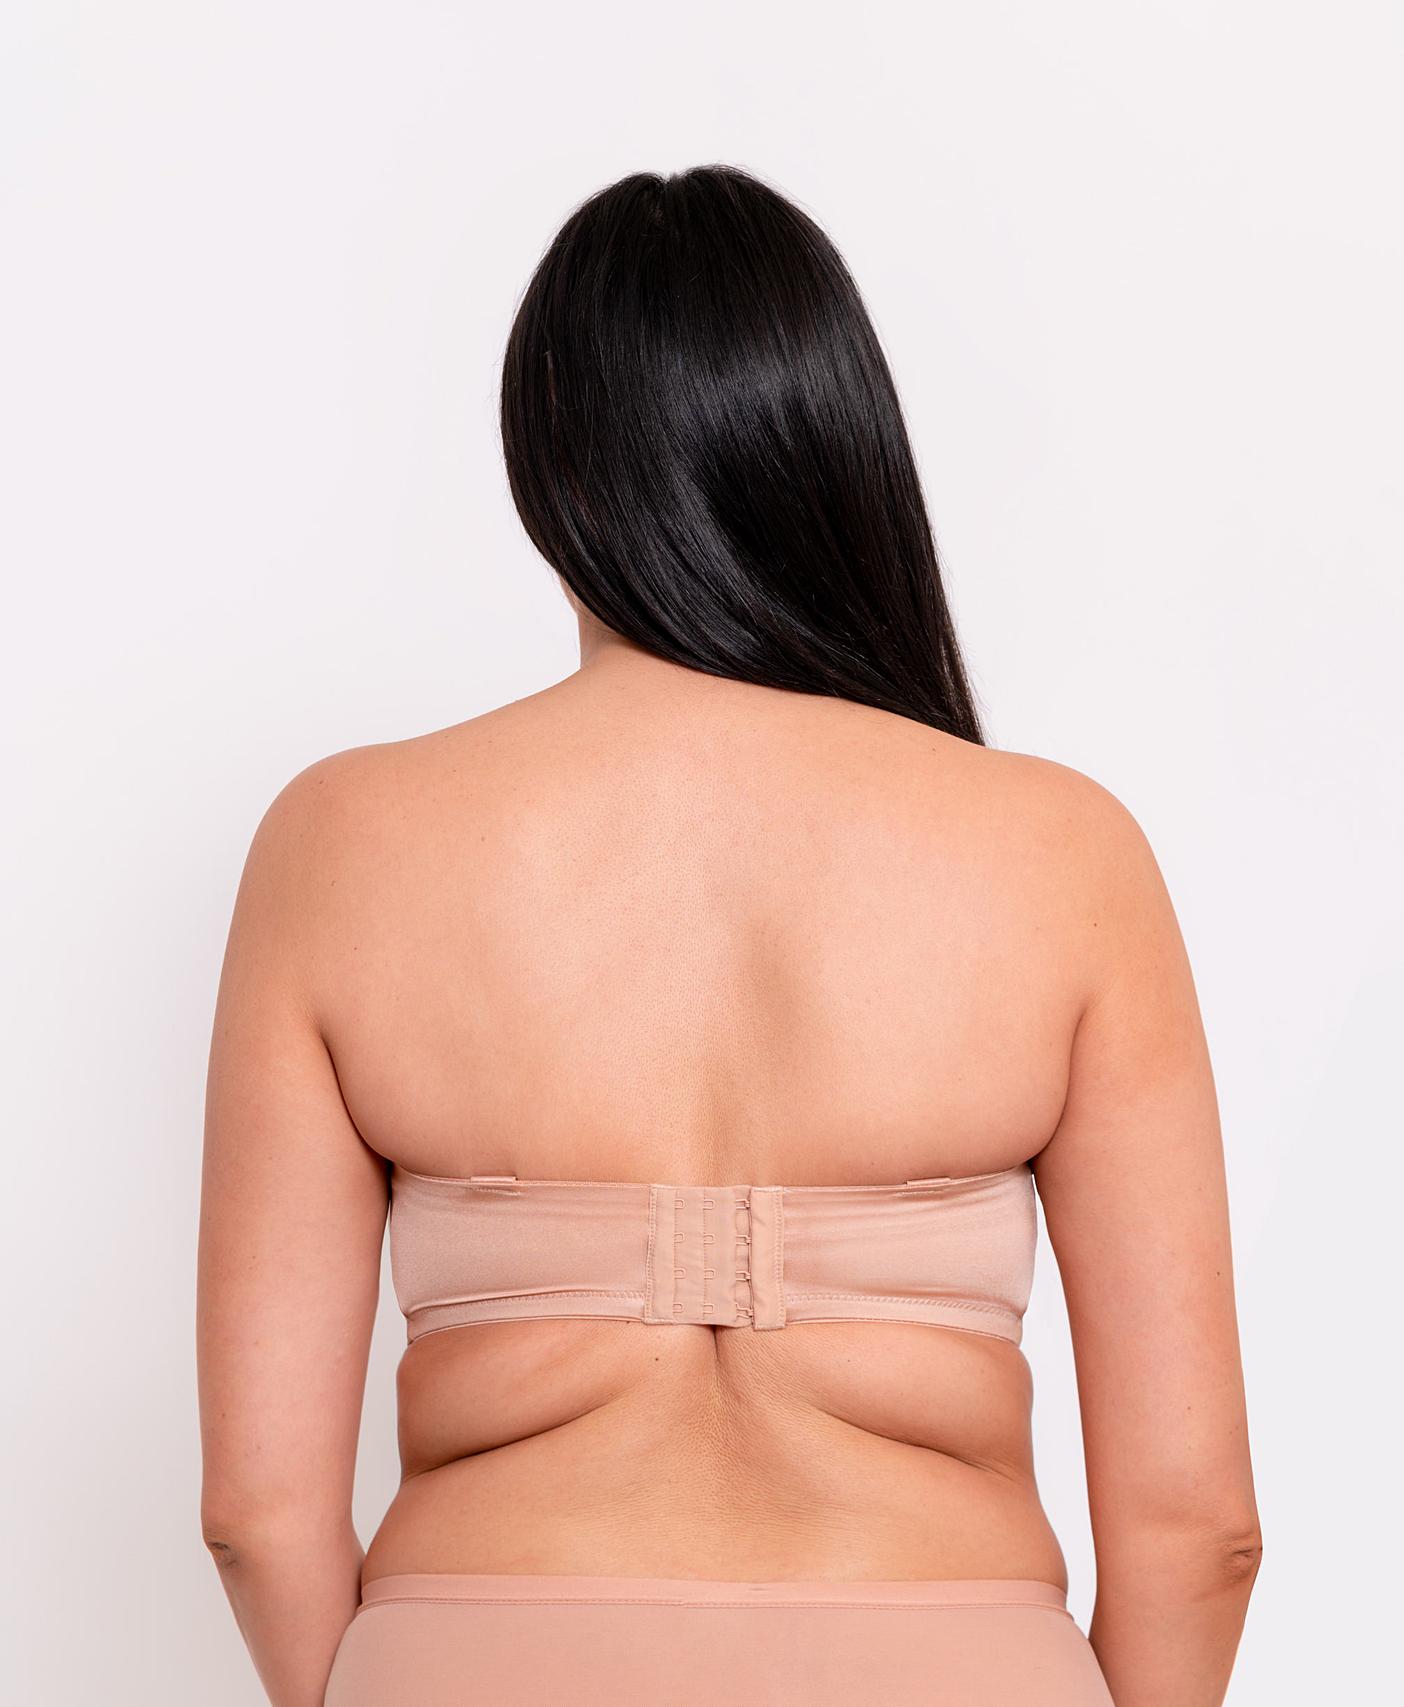 https://images2.drct2u.com/pdp_main_tablet_x2/products/cb/cb376/cb376_smoothie_strapless_latte_back.jpg